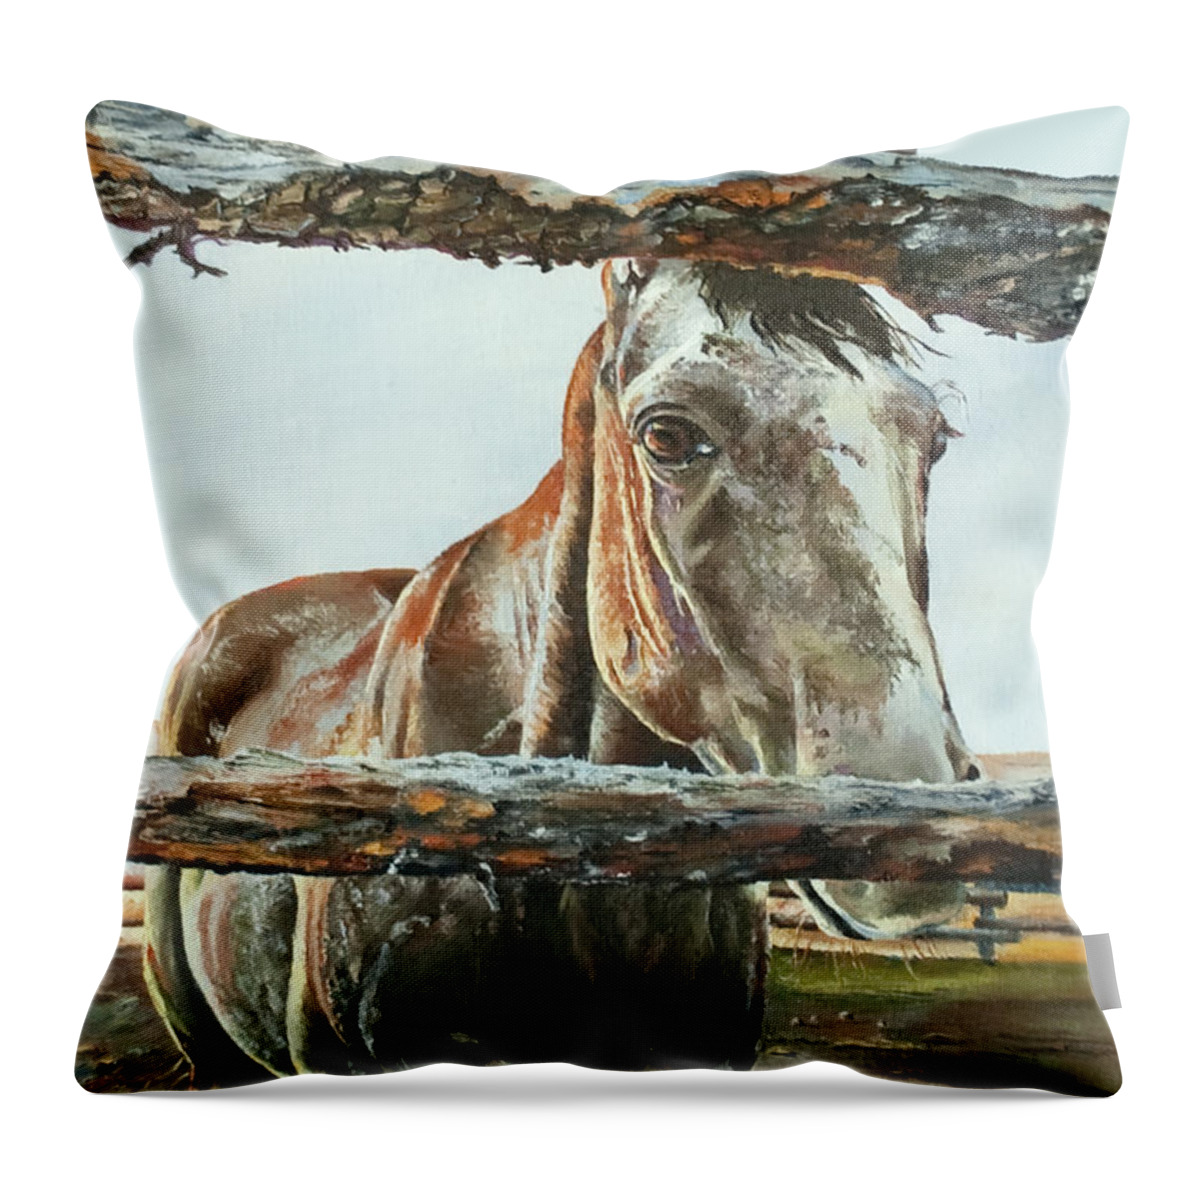 Wildlife Throw Pillow featuring the painting Powder River Elder by Terry R MacDonald